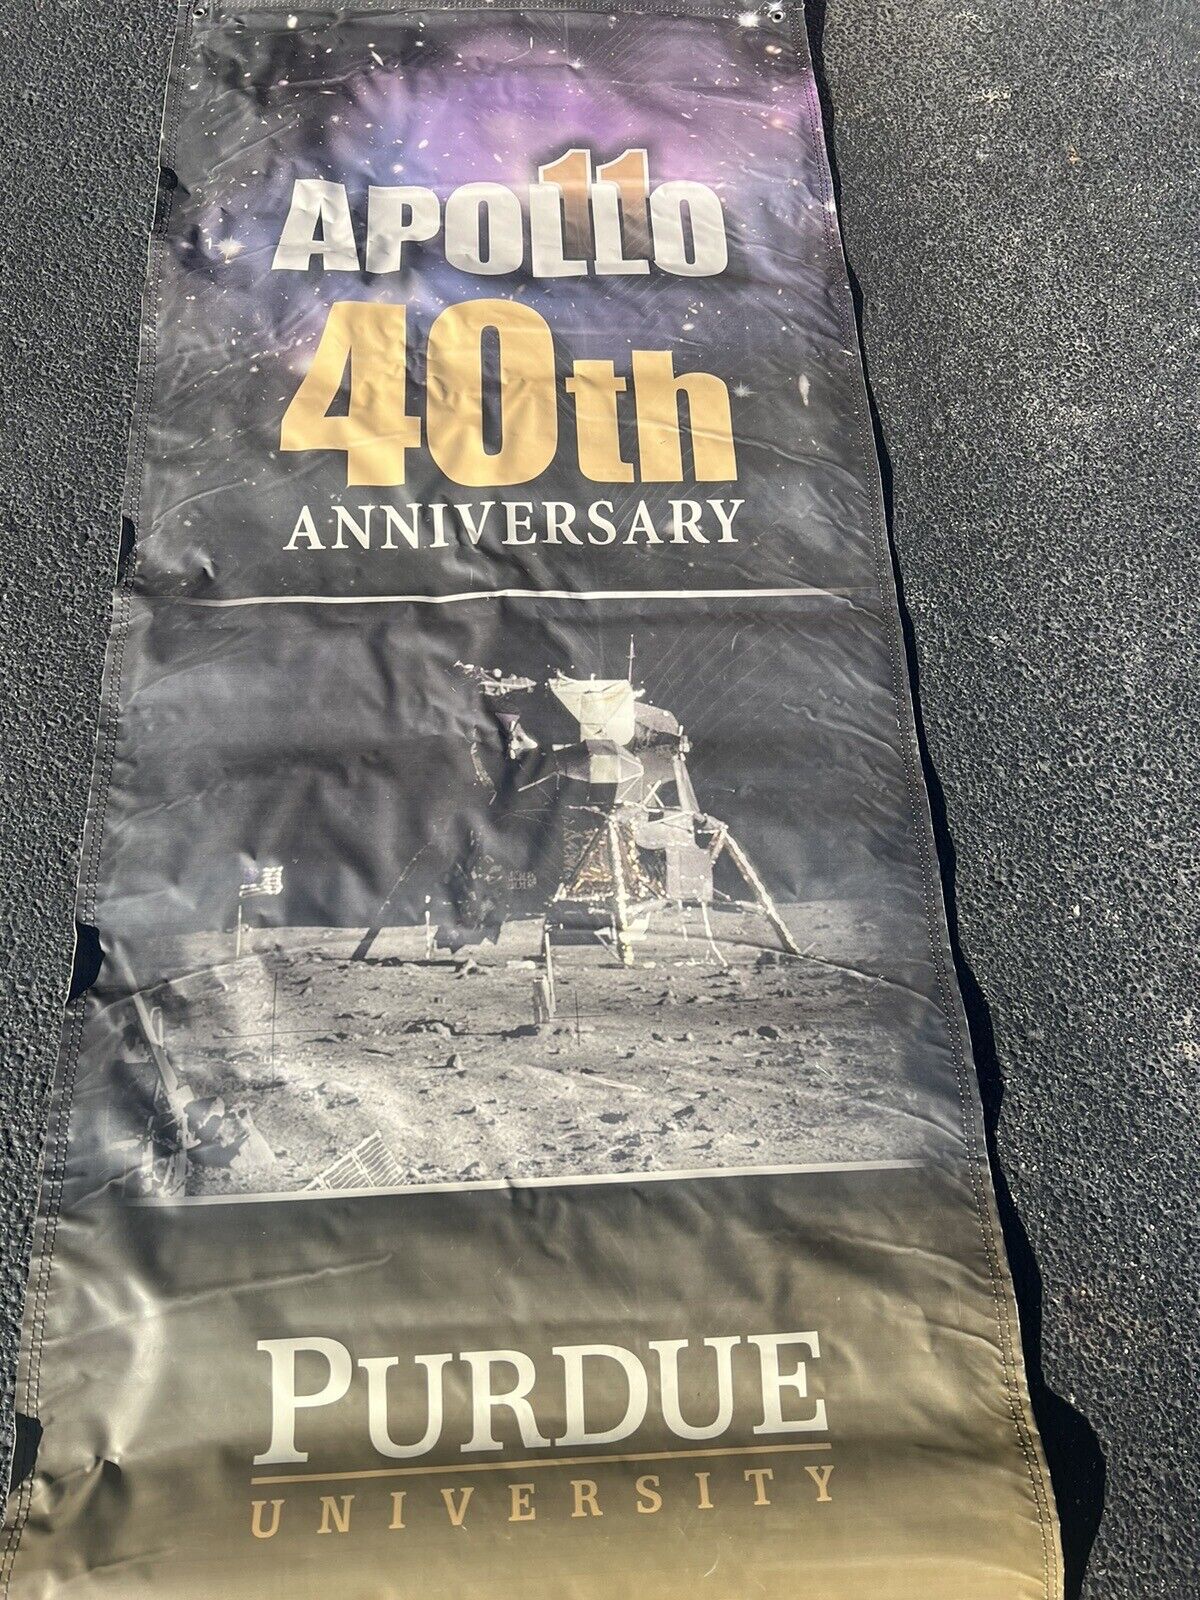 Apollo 11 40th Anniversary Purdue University Lamppost Sign 30 x 76 Inches Large 